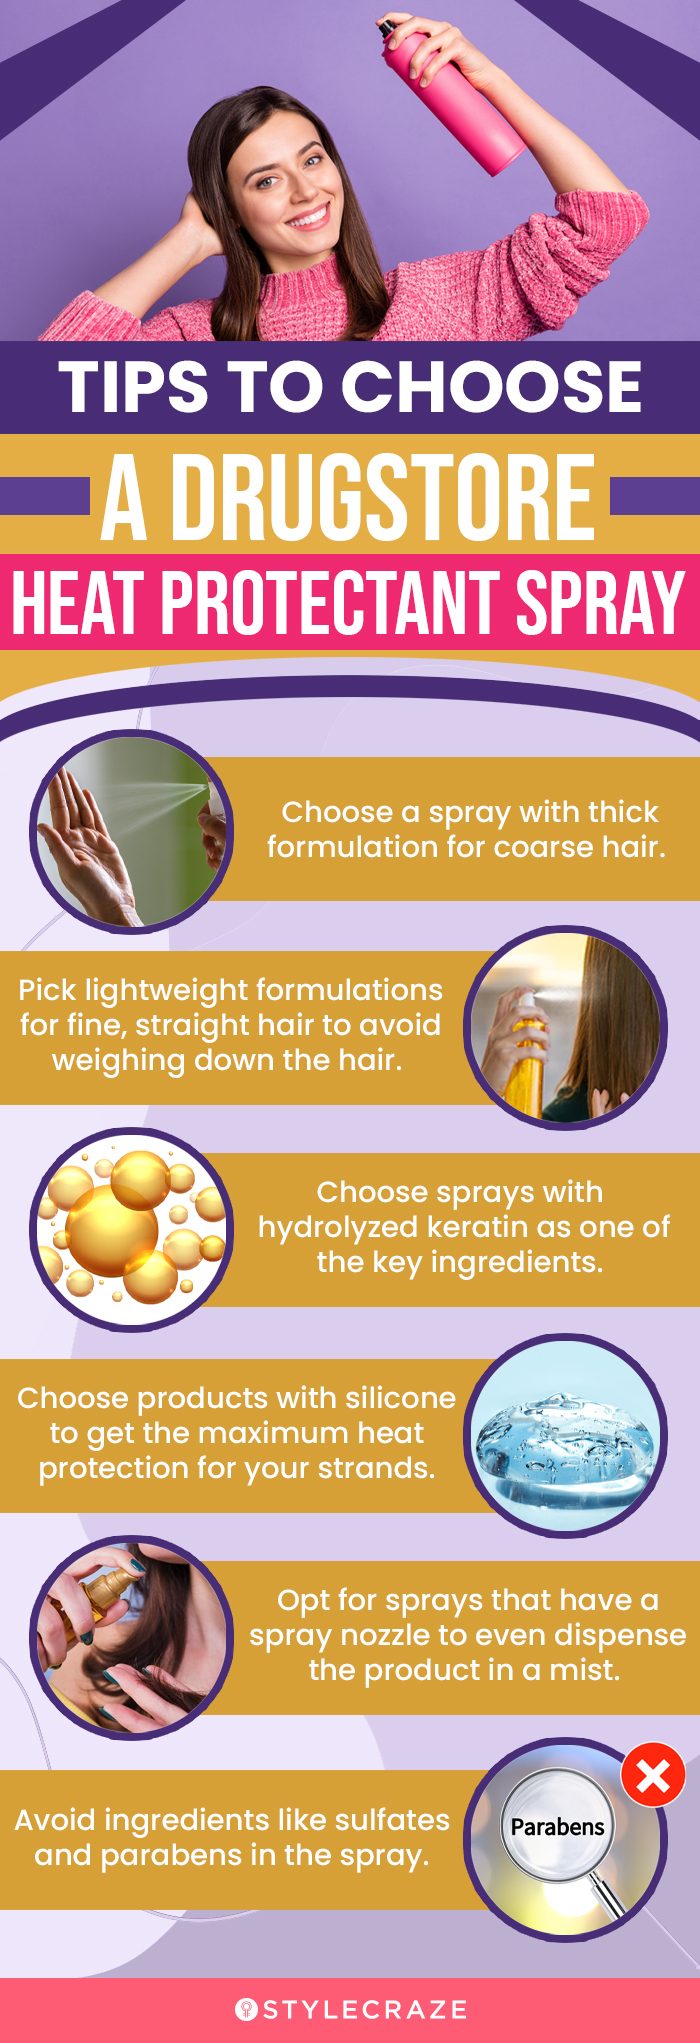 Tips To Choose A Drugstore Heat Protectant Spray (infographic)